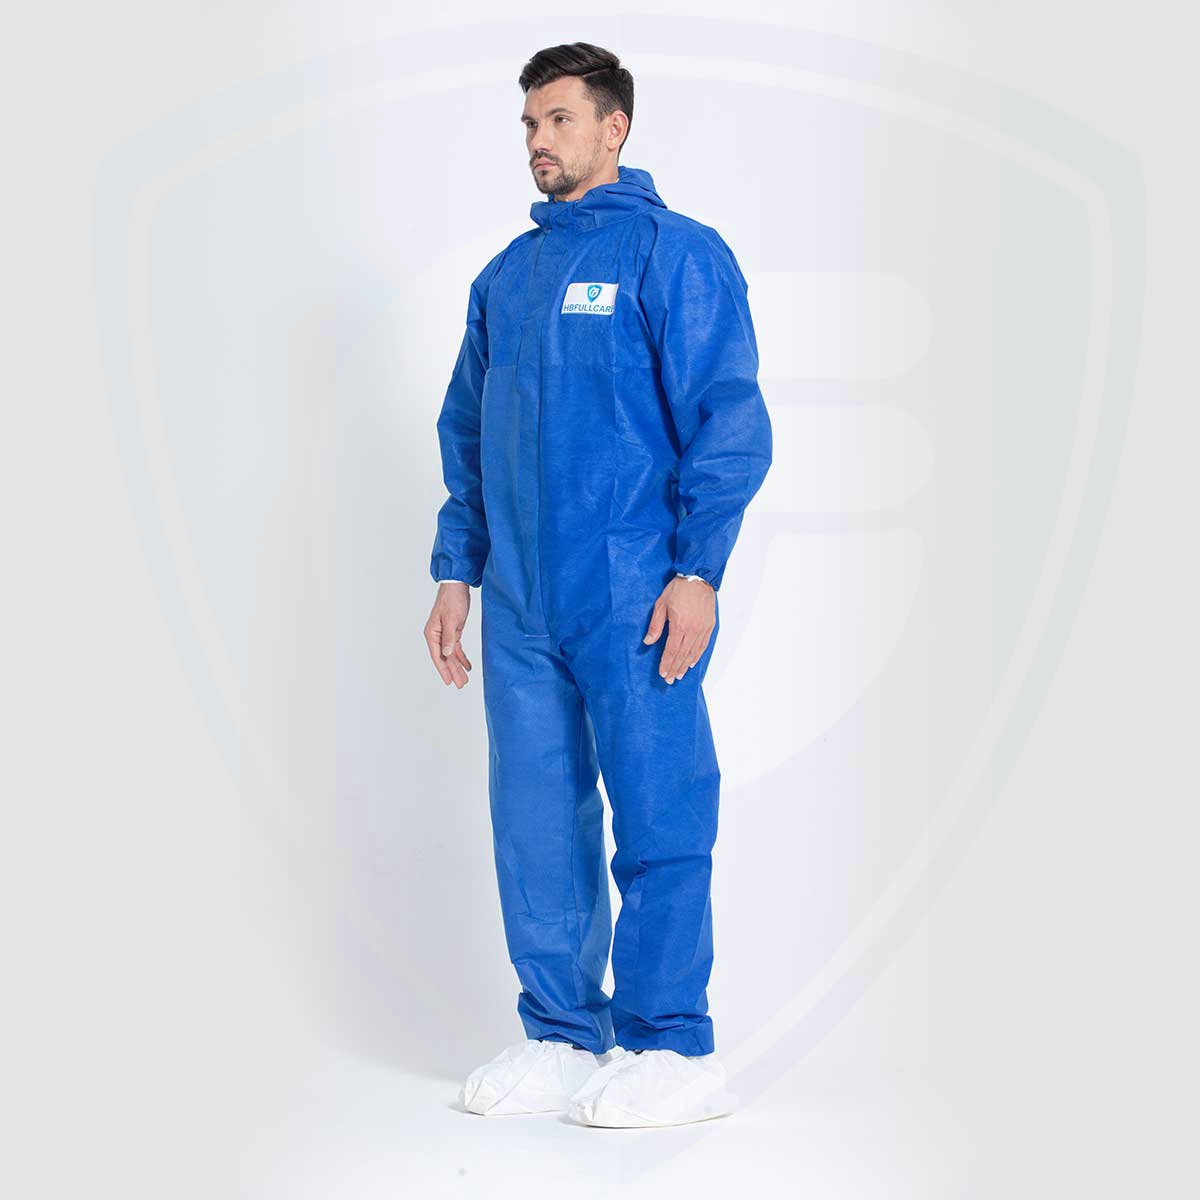 FC2030 Cat.III EN1073 EN1149 Blue High Quality Disposable Protective Coverall 